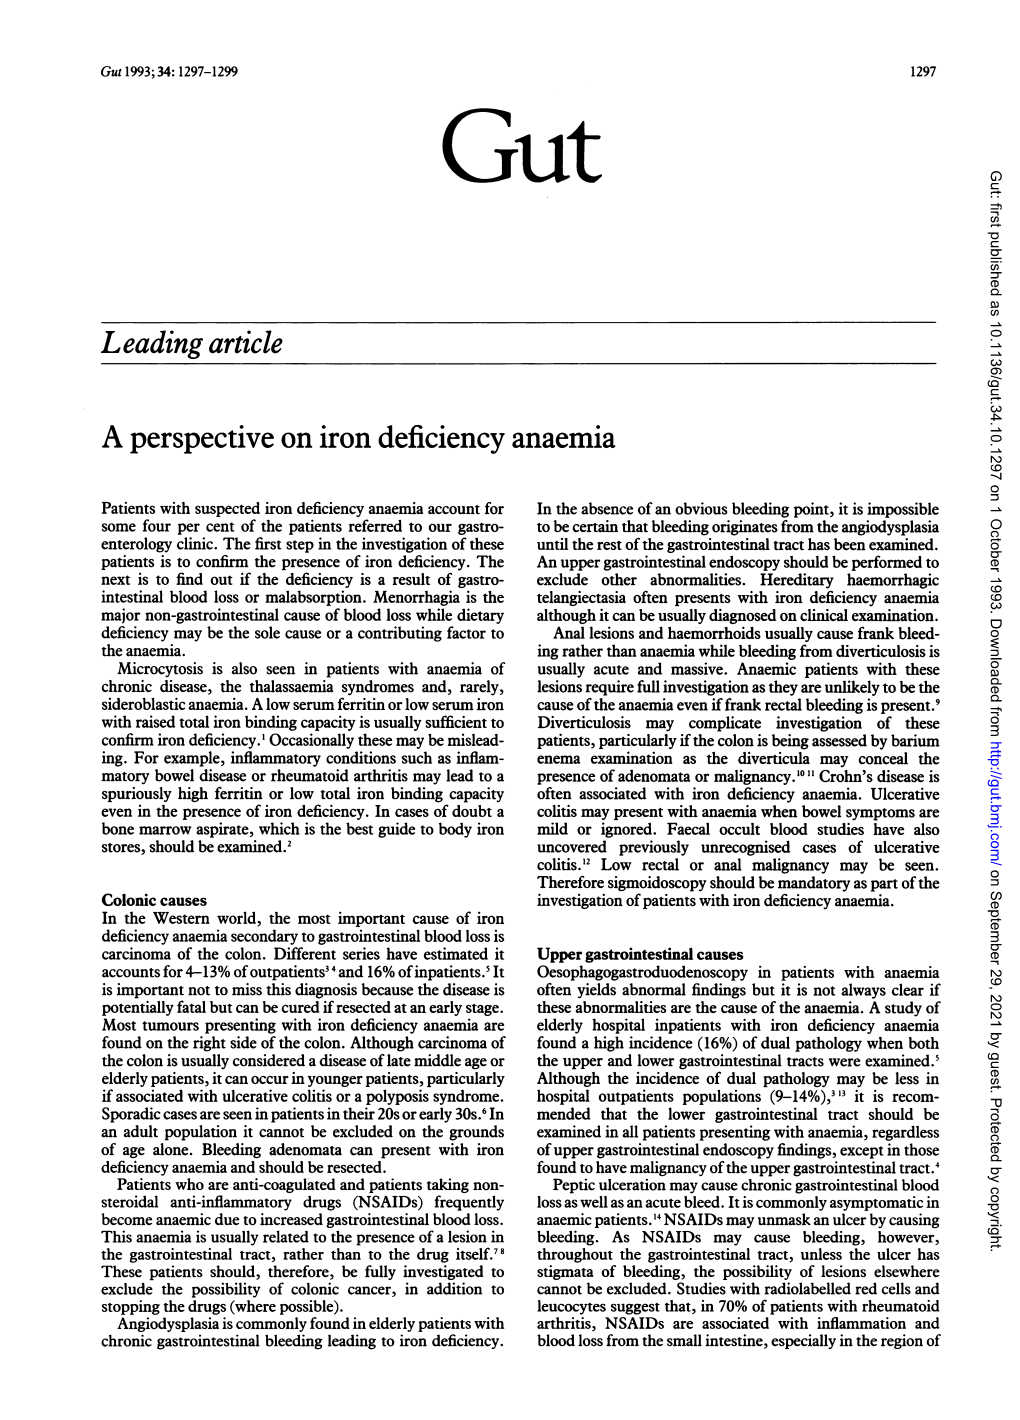 Leading Article a Perspective on Iron Deficiency Anaemia